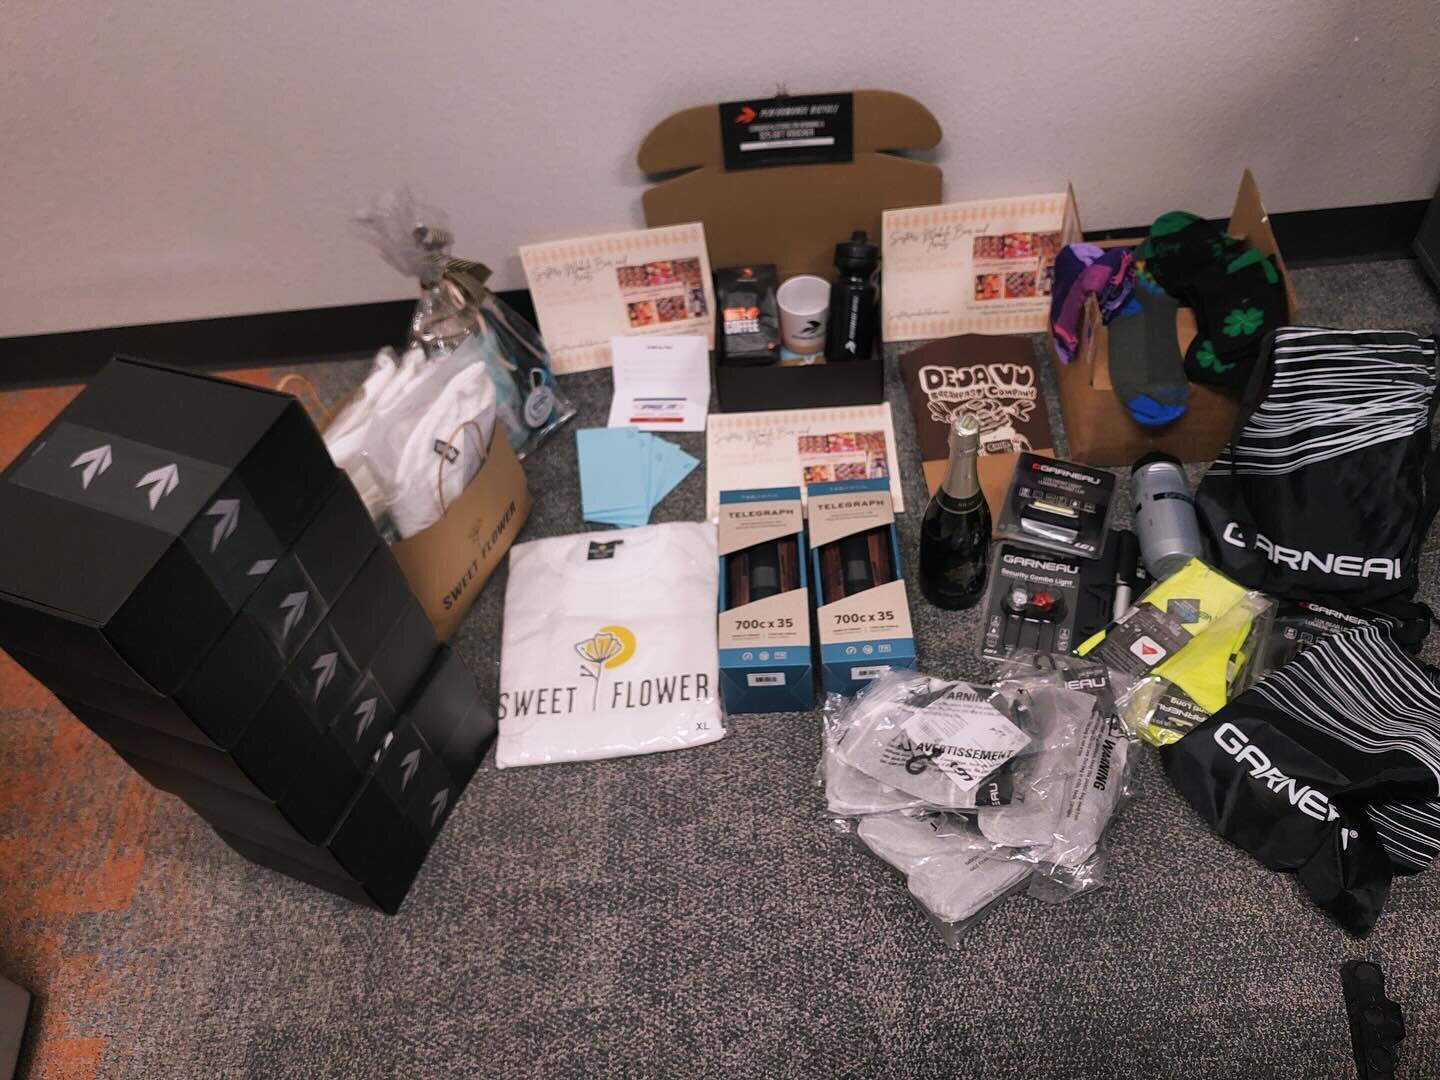 Here&rsquo;s a sneak peak of some of the prizes for the race this weekend! 
Thanks to all the prize providers! 
@performancebike 
@teravail 
@louisgarneauofficial 
@ridebellwether 
@sockguyluv 
@sweetflowershops 
@campusbicycles 
@northrimadventuresp